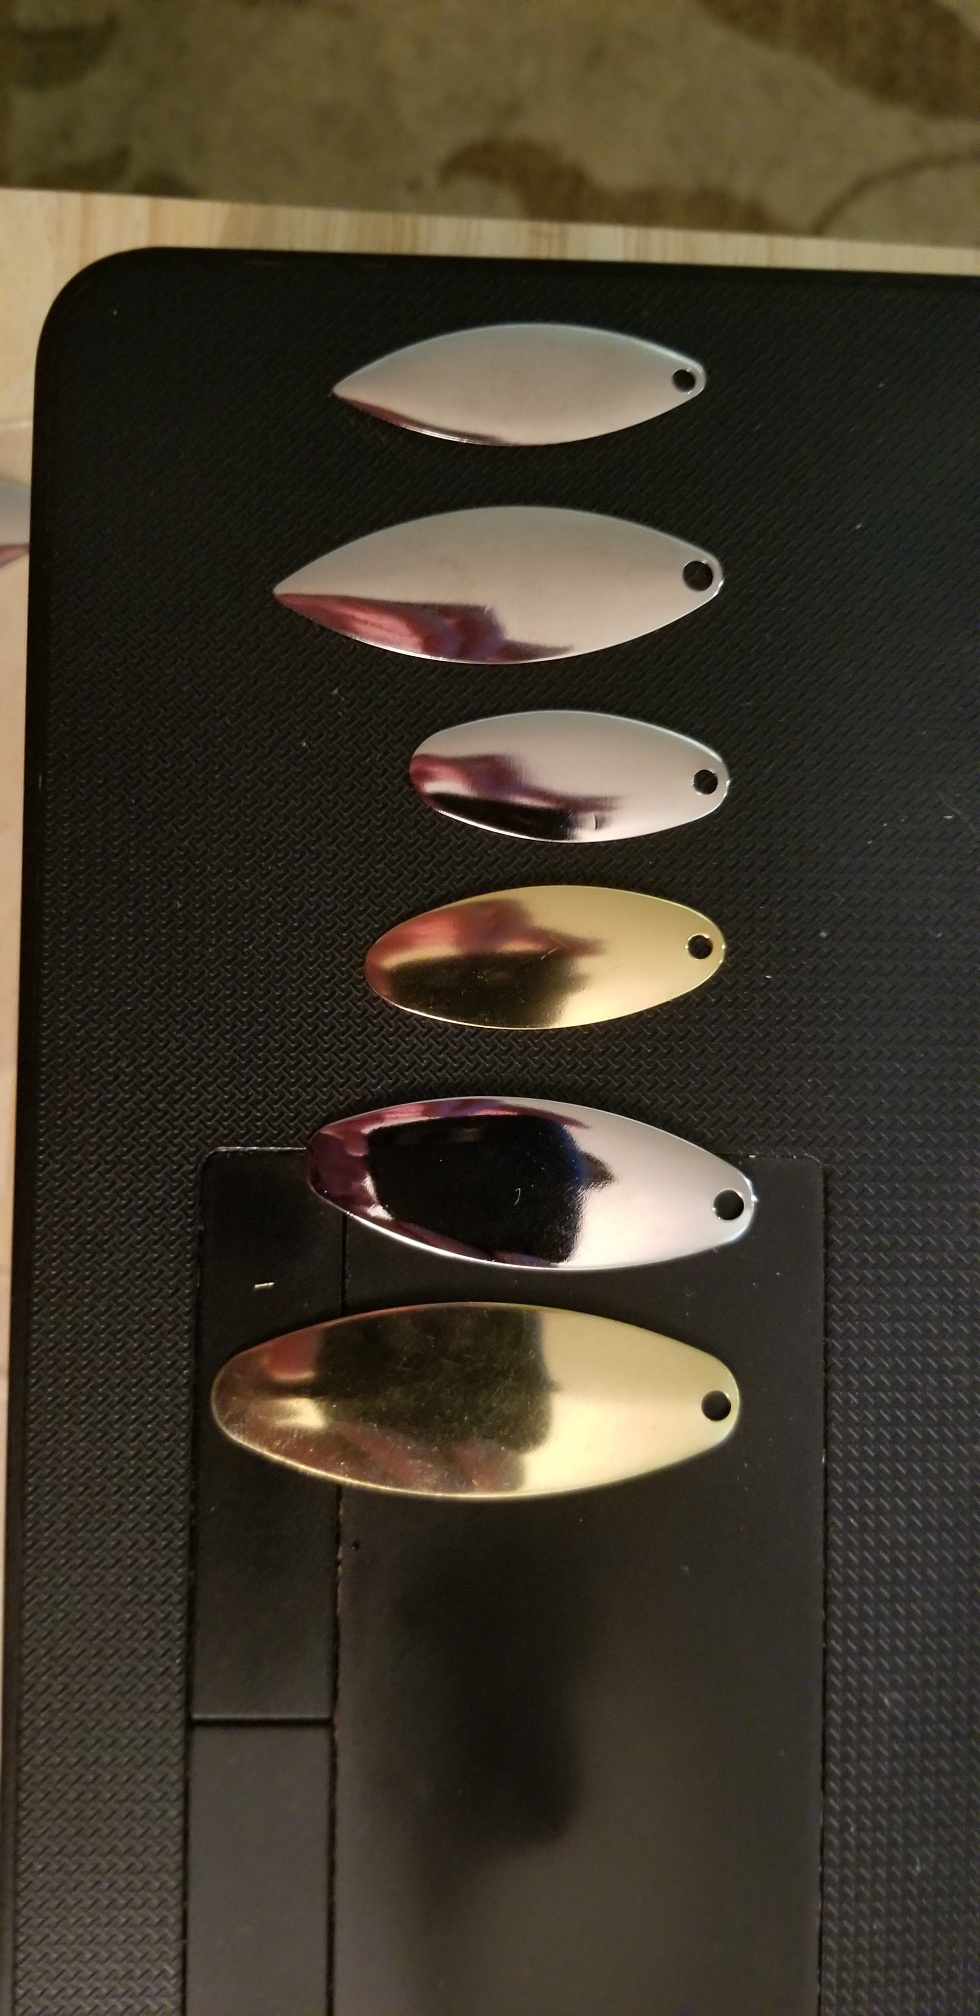 Trickster Wanna Be - Tacklemaking - Bass Fishing Forums